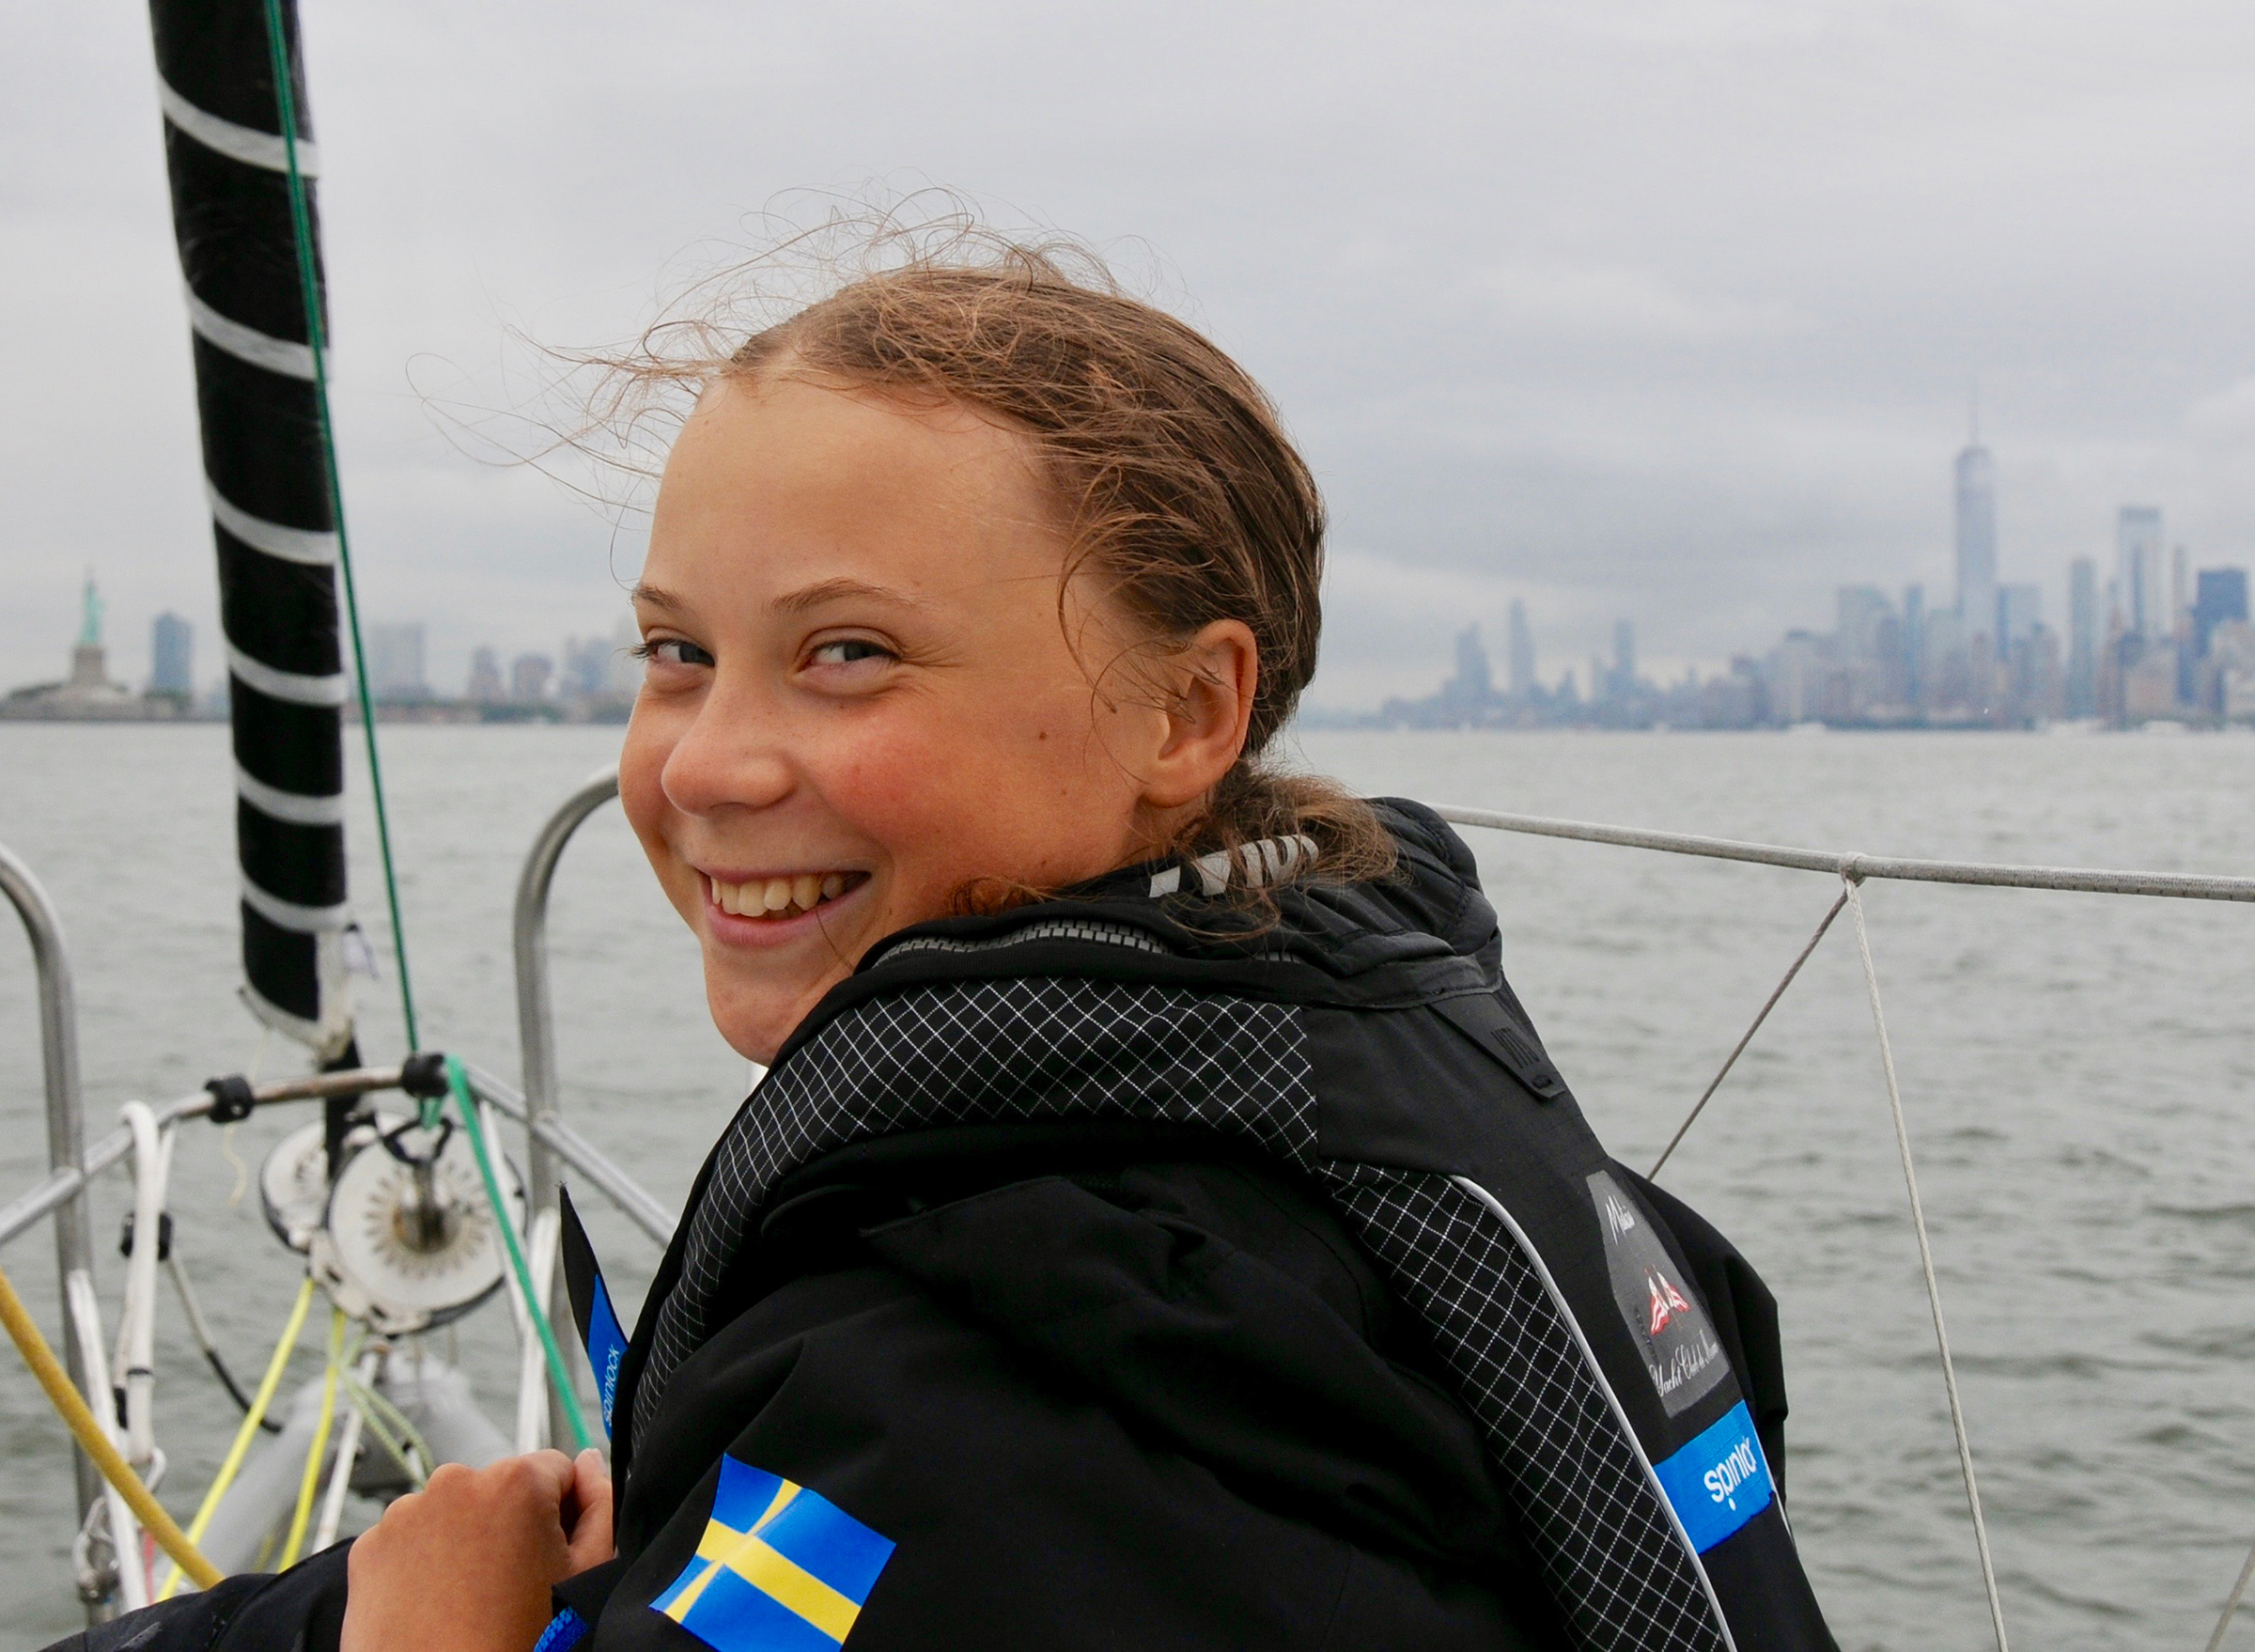 Thunberg arrives in New York City after a 15-day journey crossing the Atlantic on Aug. 28, 2019. (Courtesy of Greta Thunberg)